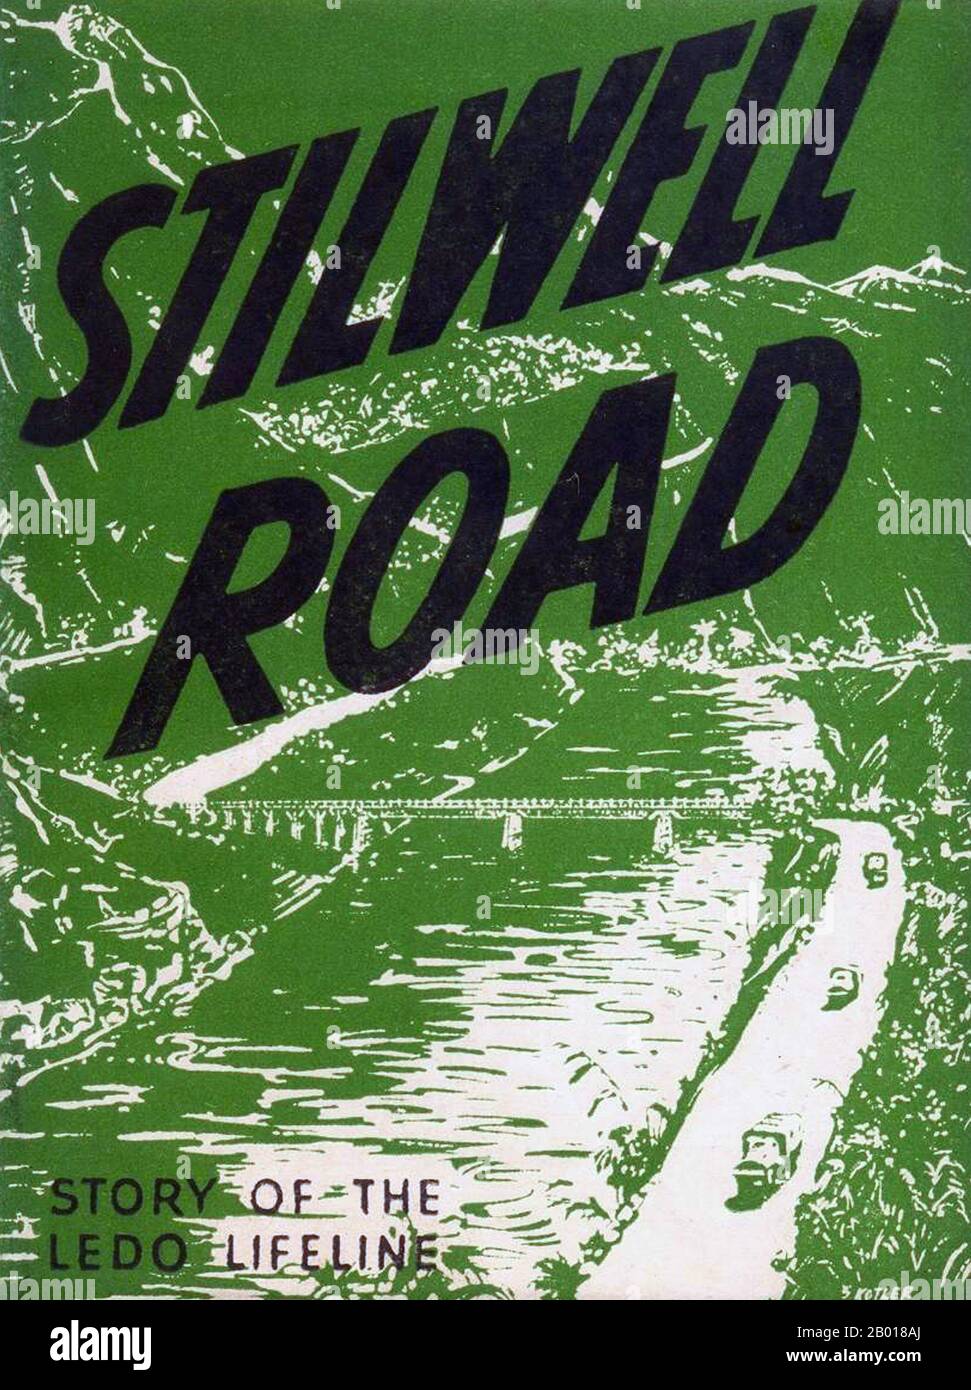 China/Burma/India: Cover of the book 'Stilwell Road - Story of the Ledo Lifeline'. Calcutta: Indian Press, c. 1944-1945.  China Burma India Theatre (CBI) was the name used by the United States Army for its forces operating in conjunction with British and Chinese Allied air and land forces in China, Burma, and India during World War II. Well-known US units in this theatre included the Flying Tigers, transport and bomber units flying the Hump, the 1st Air Commando Group, the engineers who built Ledo Road, and the 5307th Composite Unit (Provisional), otherwise known as Merrill's Marauders. Stock Photo